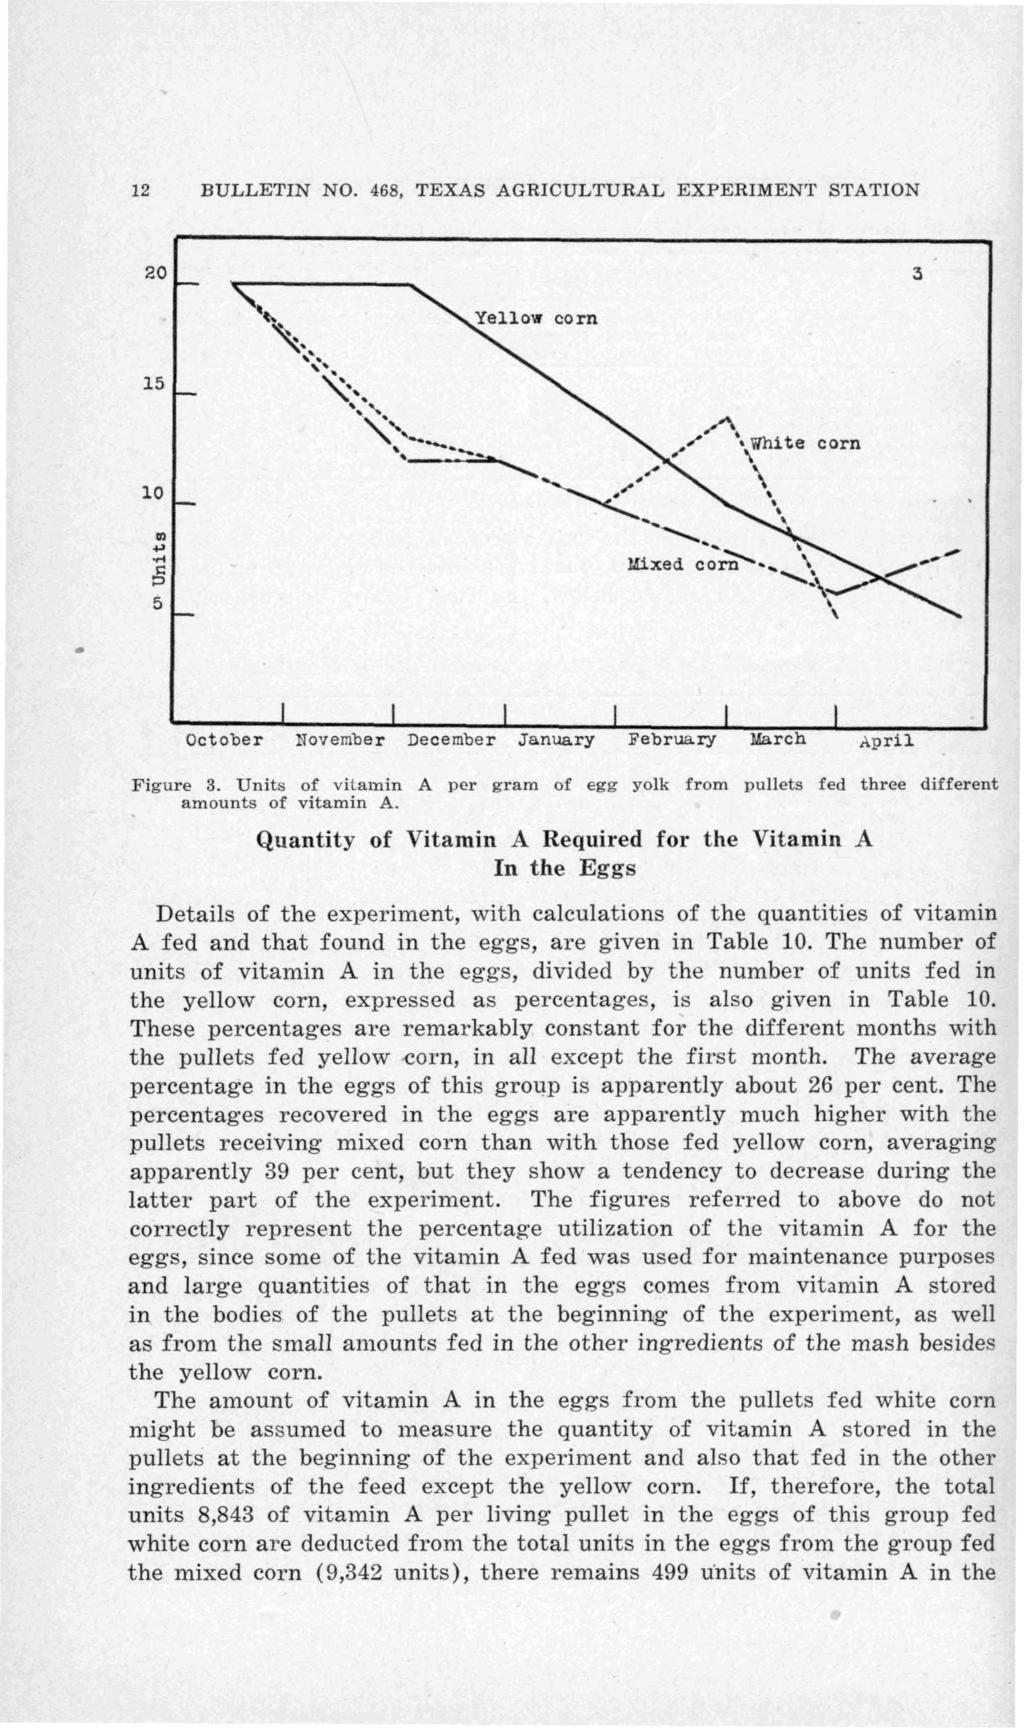 12 BULLETIN NO. 468, TEXAS AGRICULTURAL EXPERIMENT STATION Figure 3. Units of vitamin A per gram of egg yolk from pullets fed three different amounts of vitamin A.